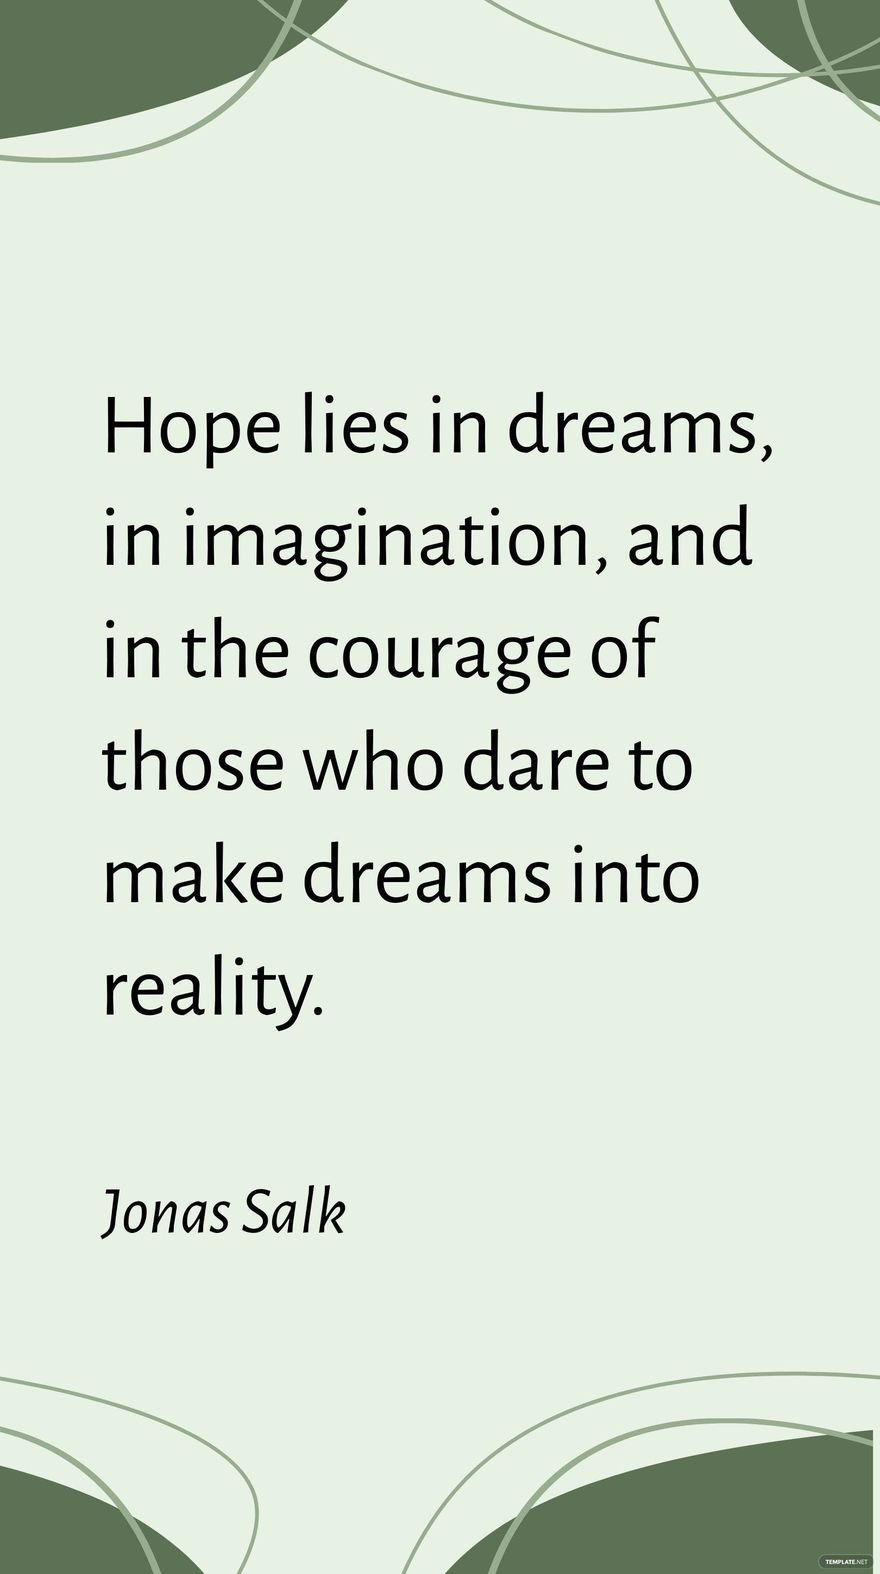 Jonas Salk - Hope lies in dreams, in imagination, and in the courage of those who dare to make dreams into reality.